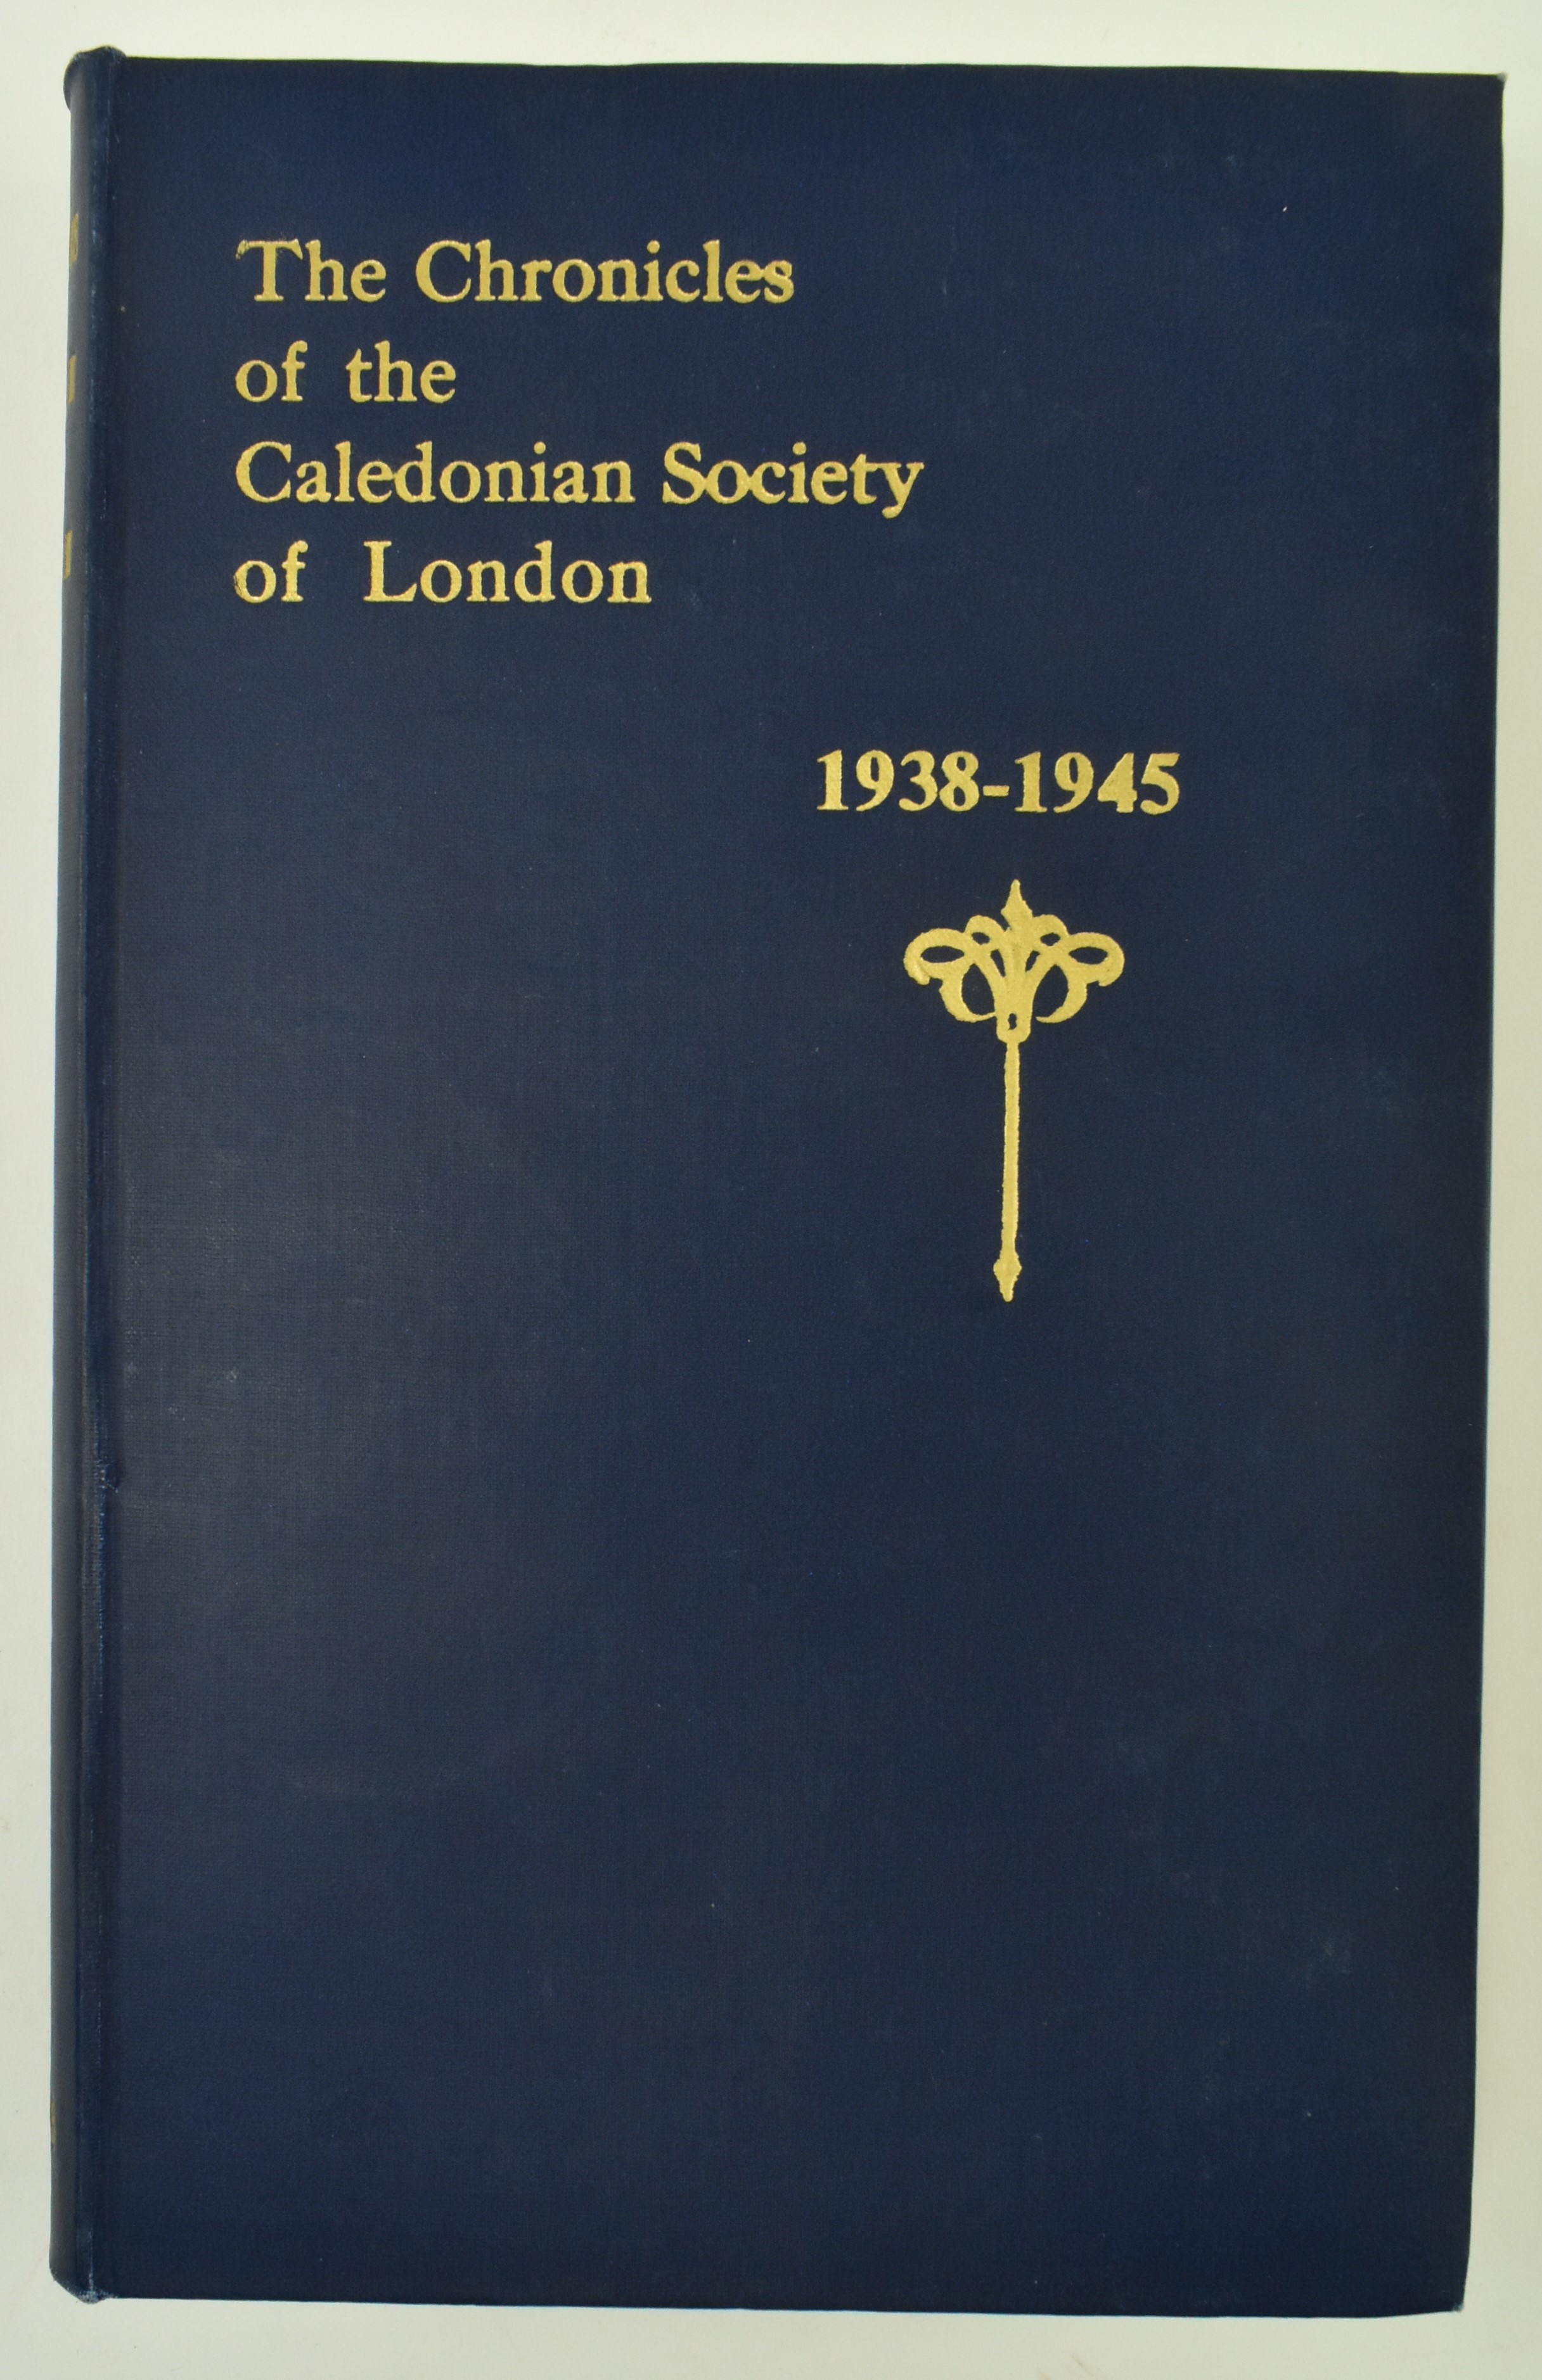 THE CHRONICLES OF THE CALEDONIAN SOCIETY, LONDON. 6 VOLUMES - Image 5 of 9